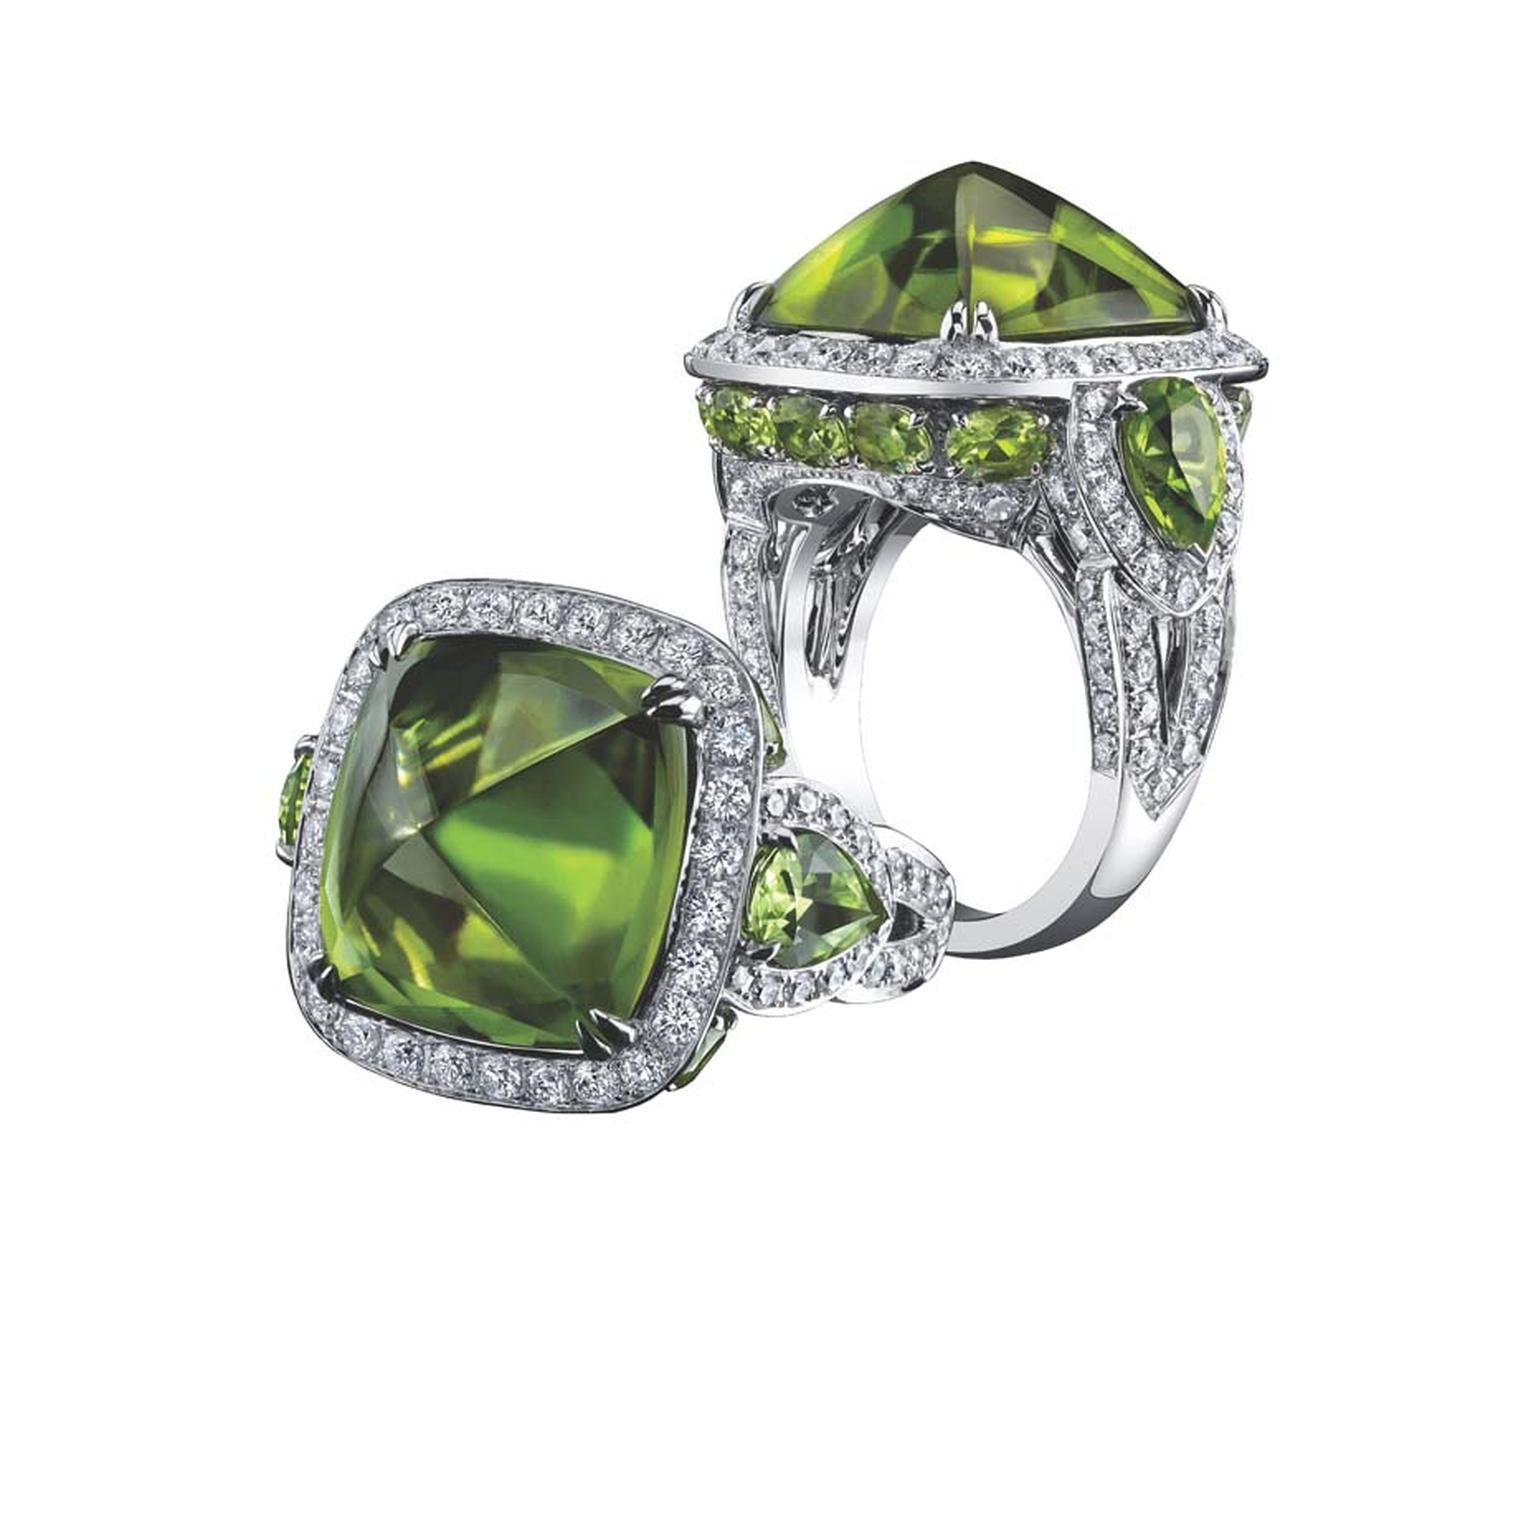 Robert Procop ring in white gold, from the Legacy Brooke collection, set with a 17.00ct sugarloaf peridot and diamonds ($24,000).